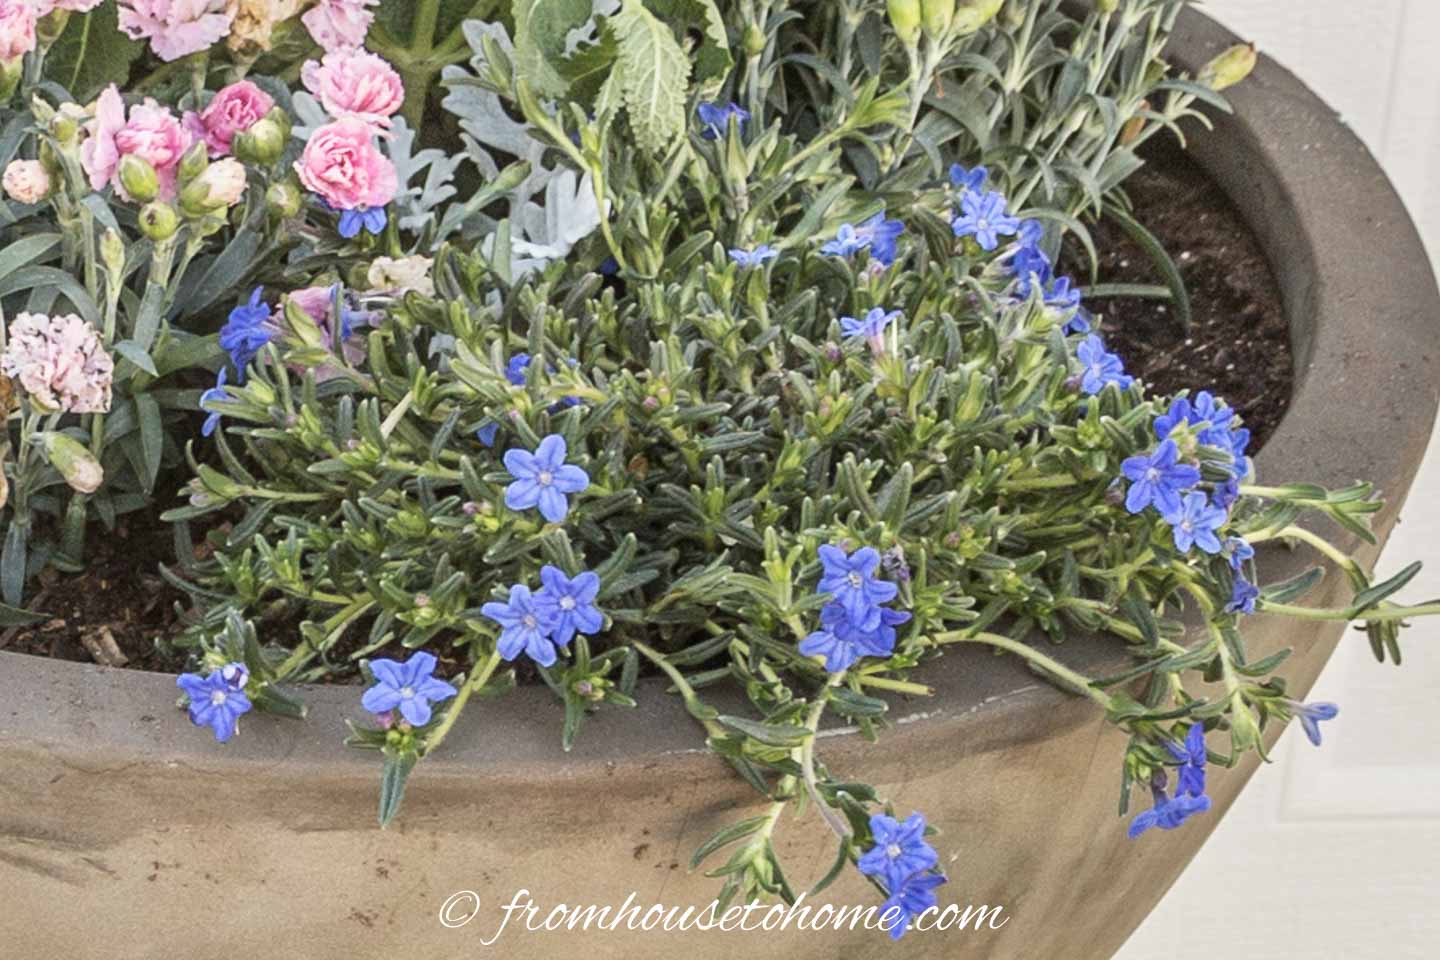 Blue Browallia in a container in the shade